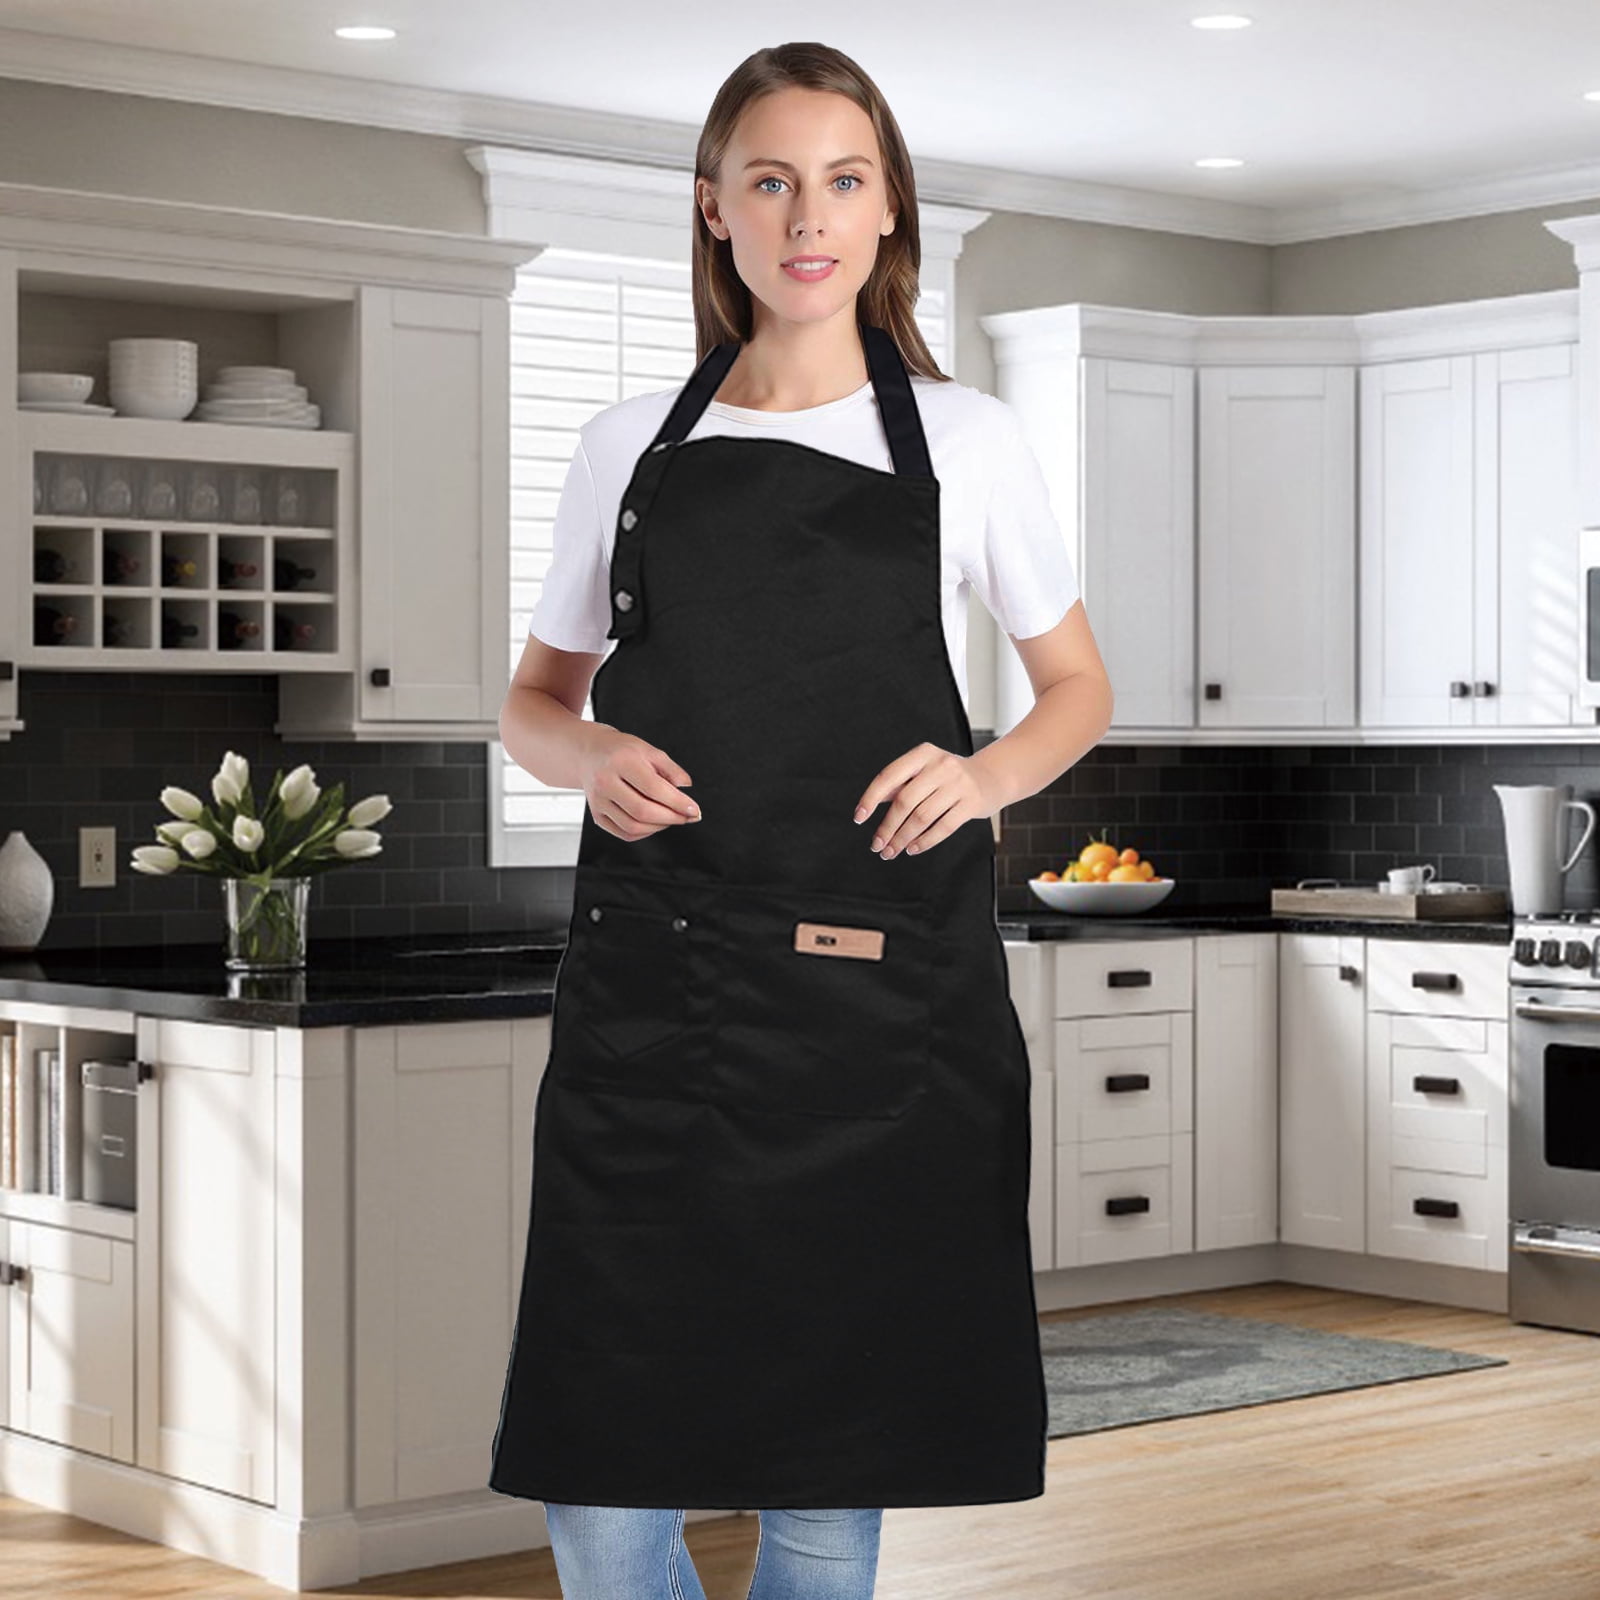 Waterproof Apron With Pockets Kitchen Restaurant Chef Cooking Unisex USA 